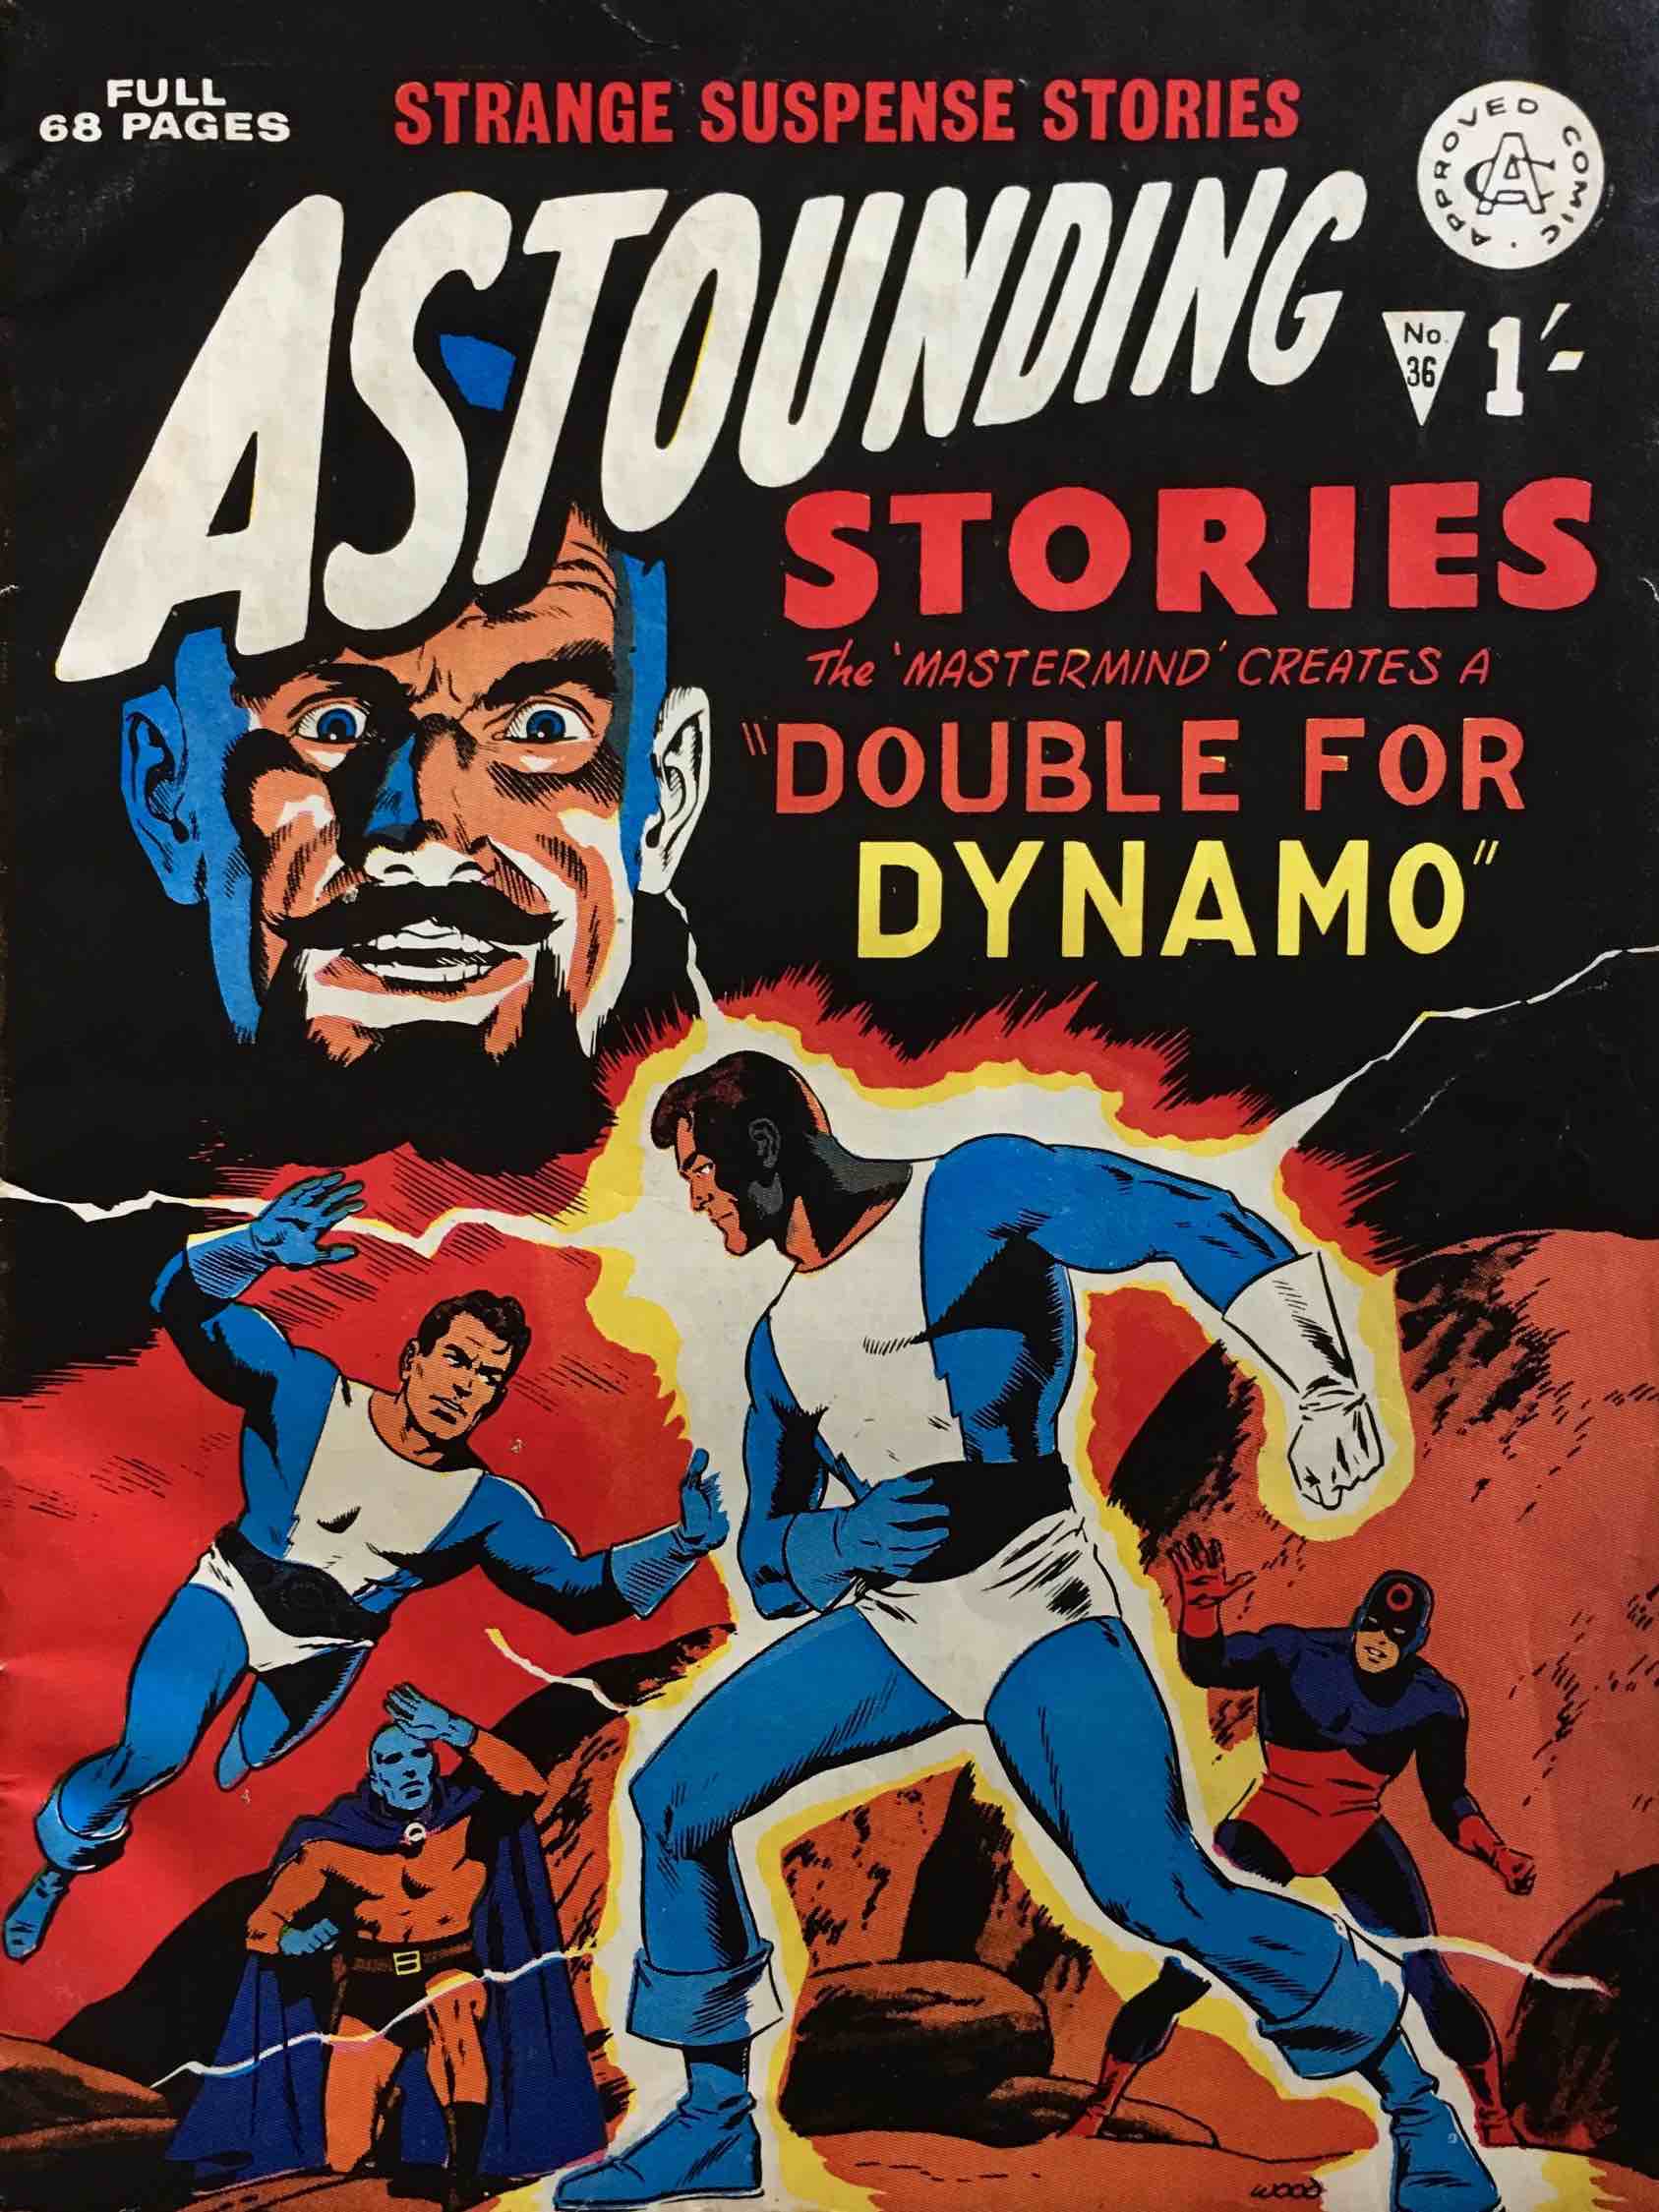 Book Cover For Astounding Stories 36